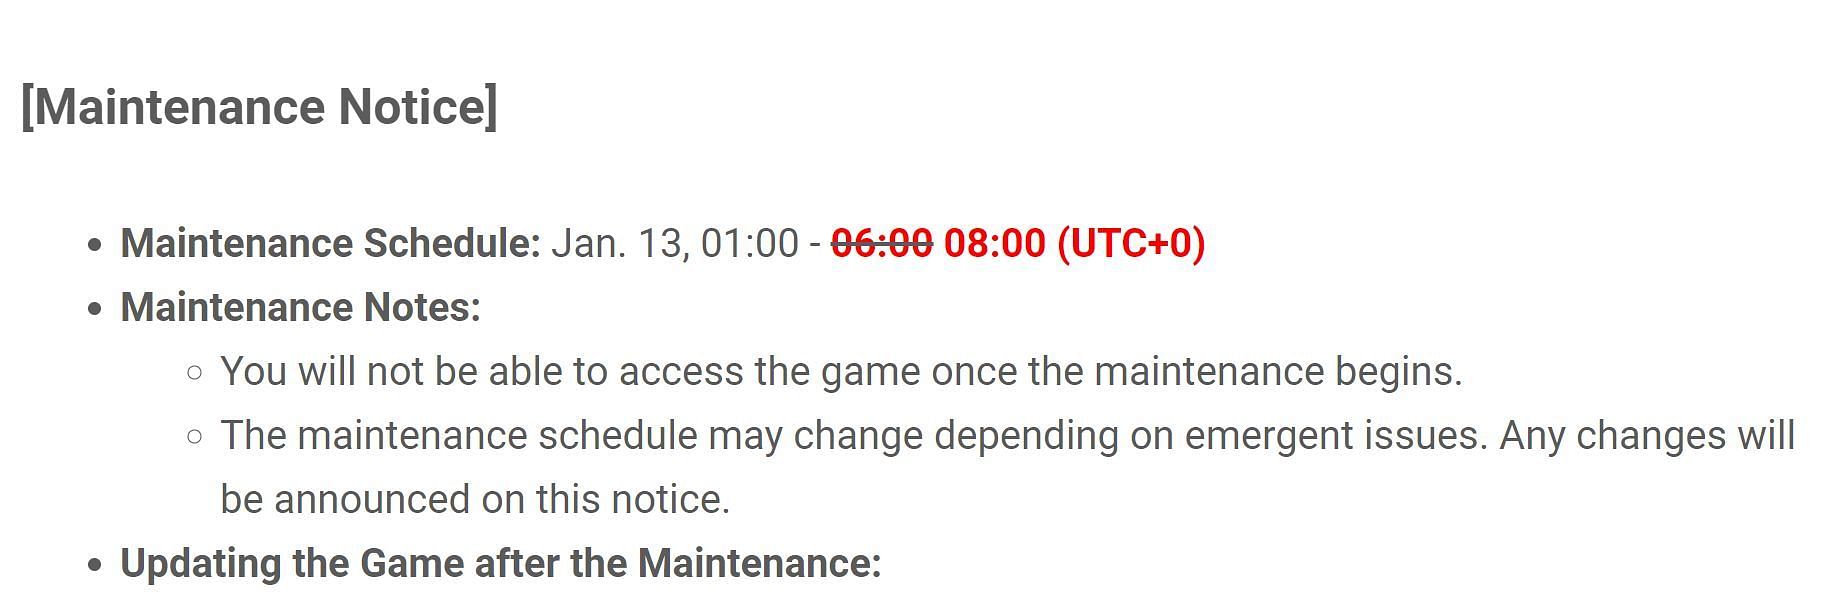 Details about the maintenance schedule (Image via PUBG New State)